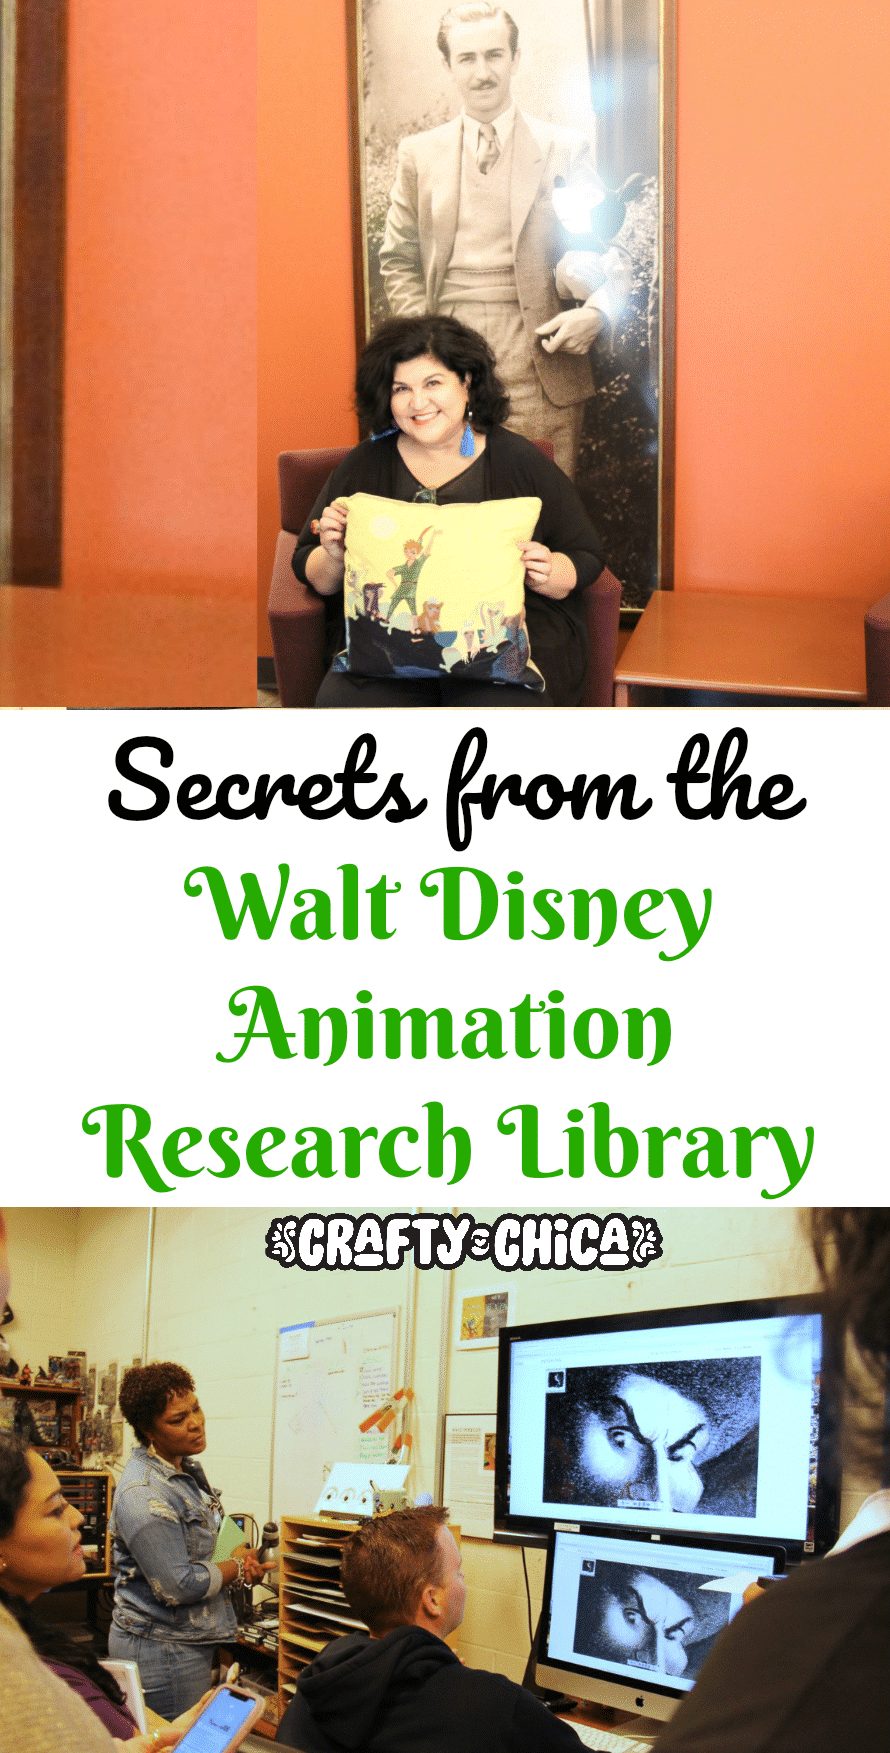 A top secret visit to the Disney Animation Research Library - Crafty Chica